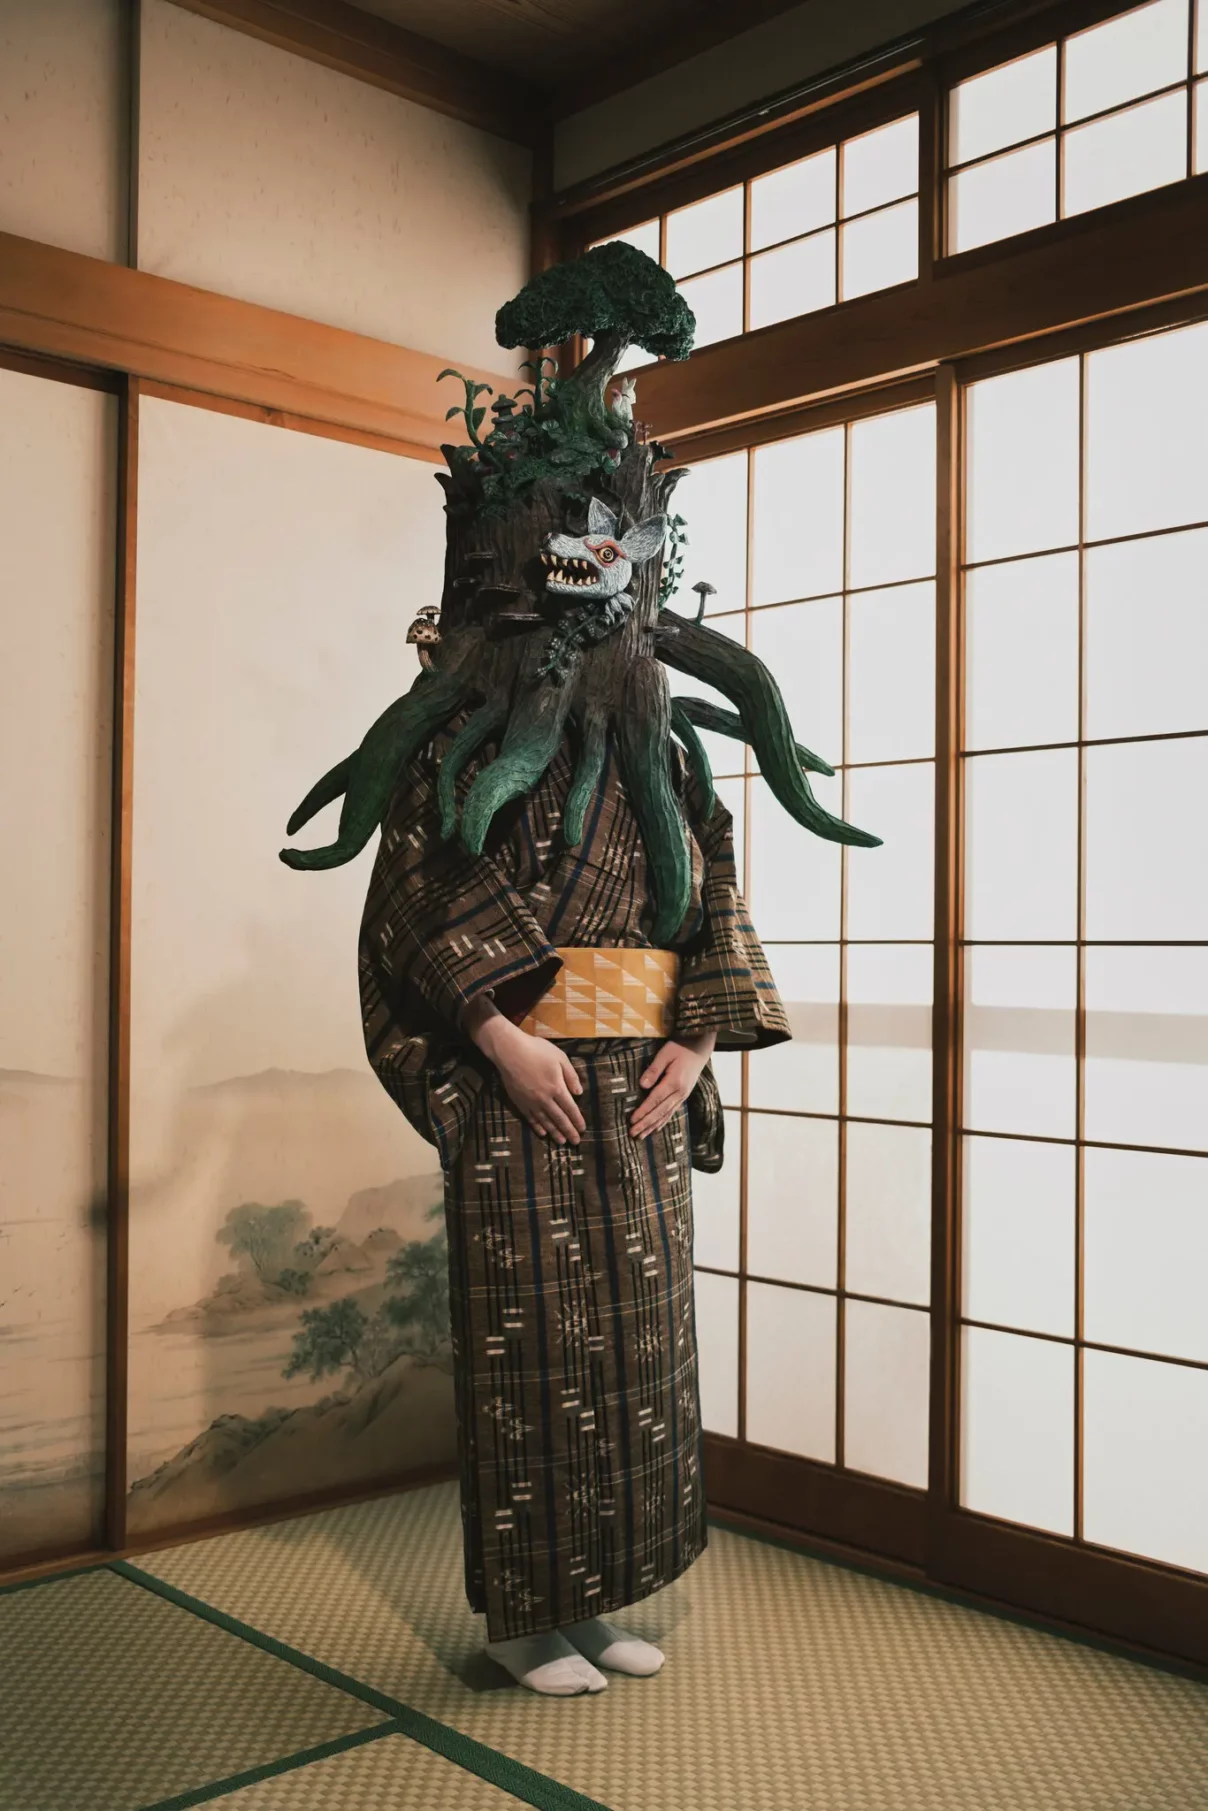 The Female Artisans Honoring, and Reinventing, Japanese Noh Masks.